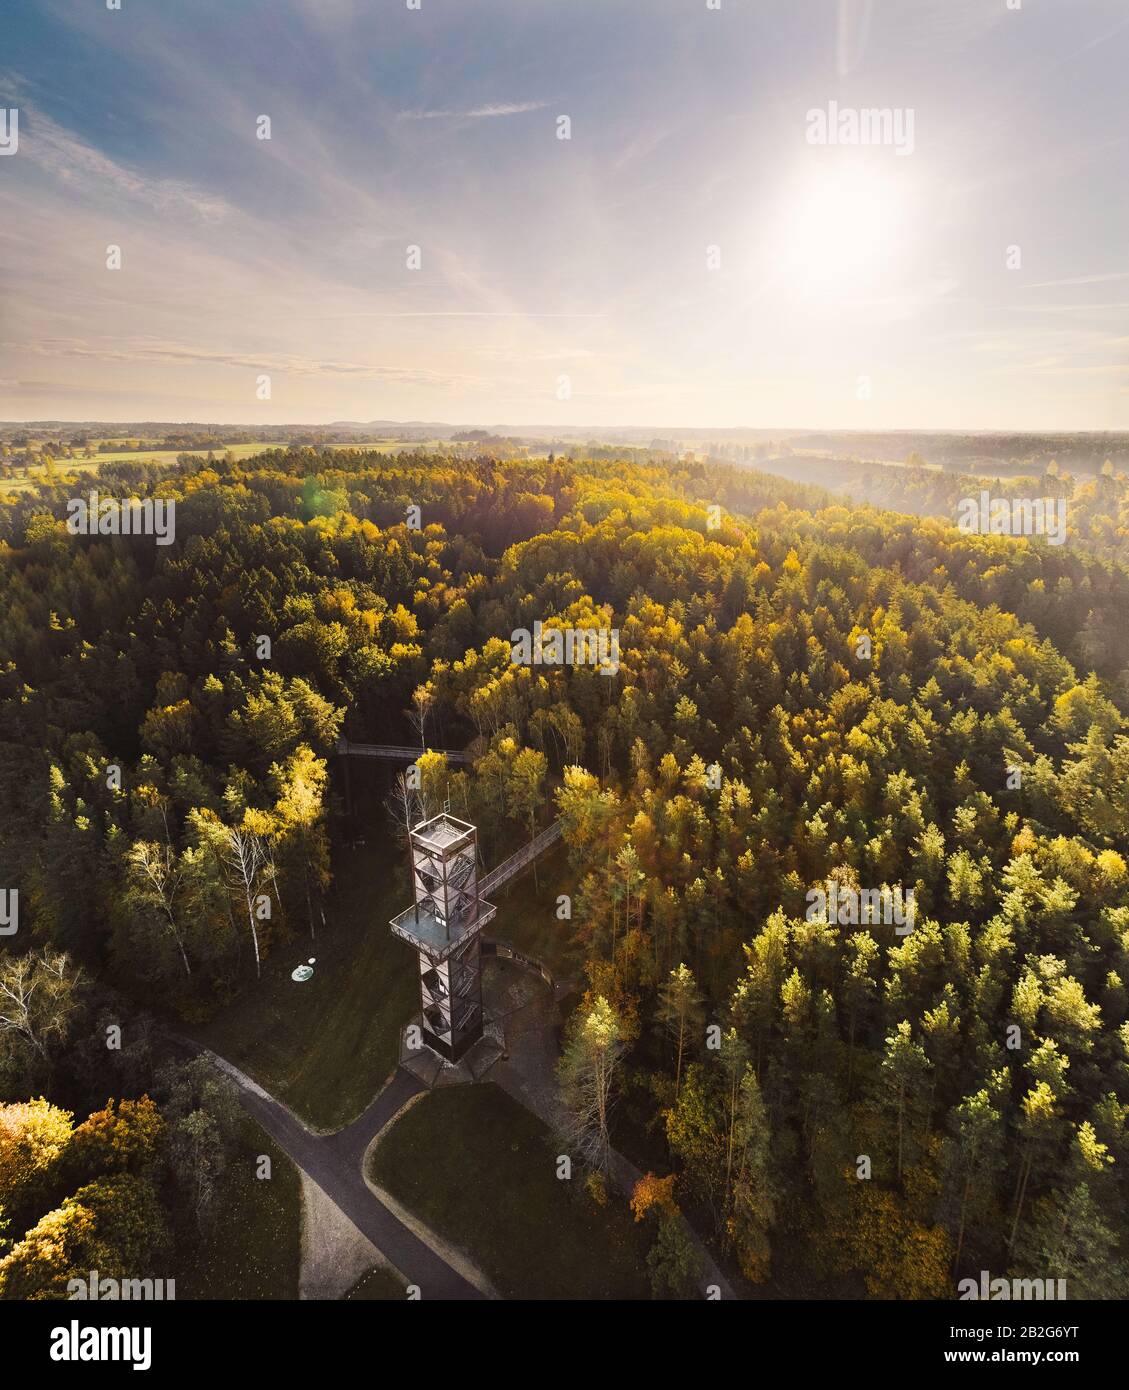 The Treetop Walking Path in Anykščiai Lithuania from the drone perspective Stock Photo